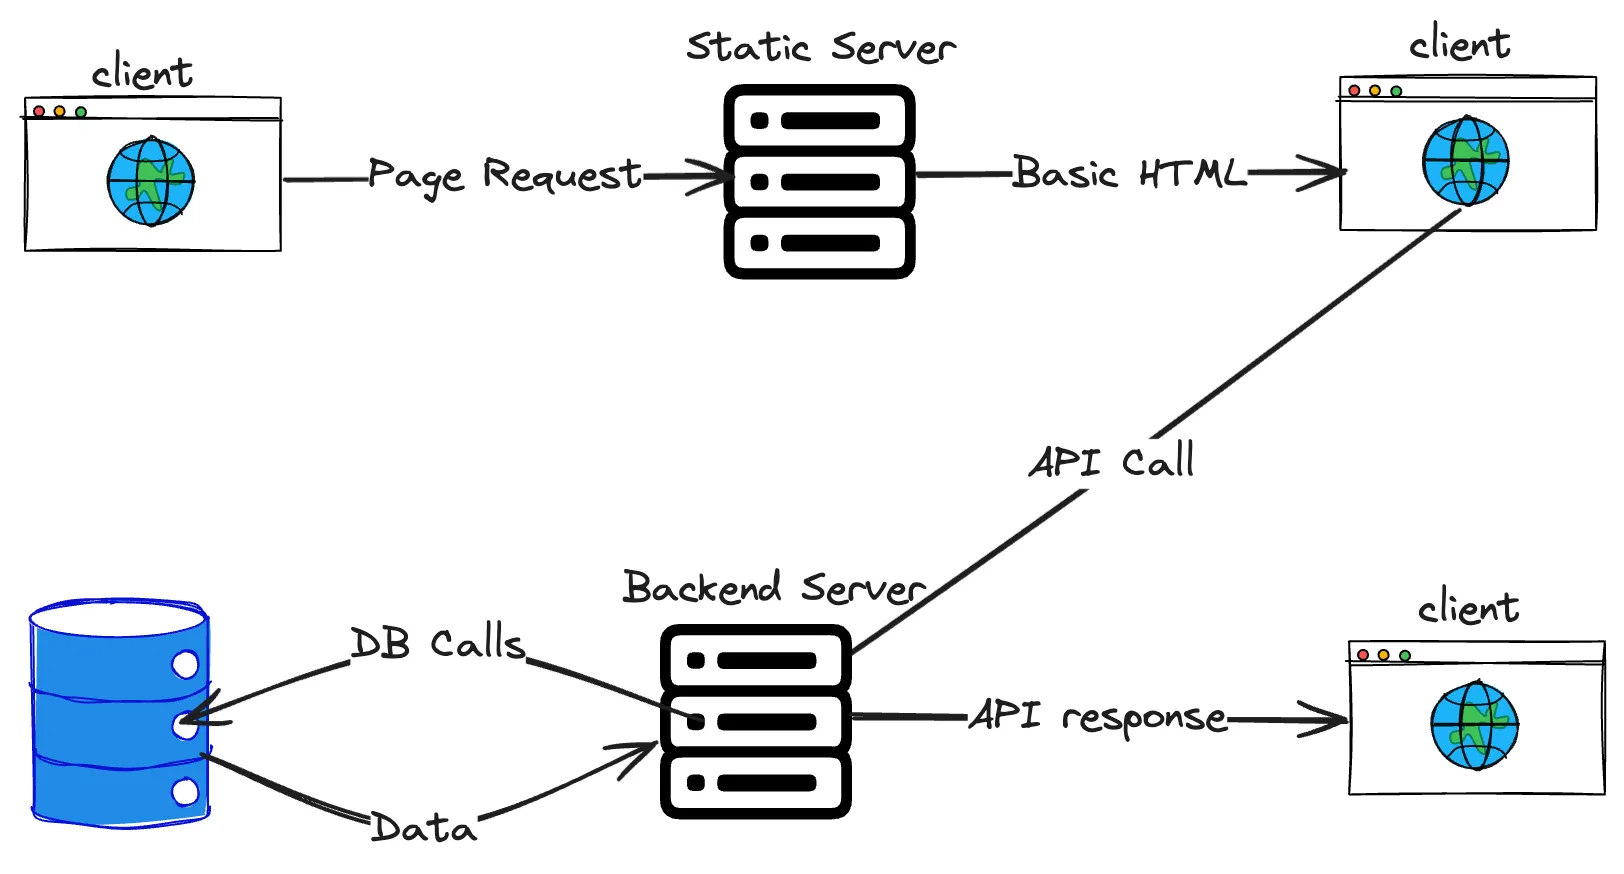 Web pages rendering using API calls